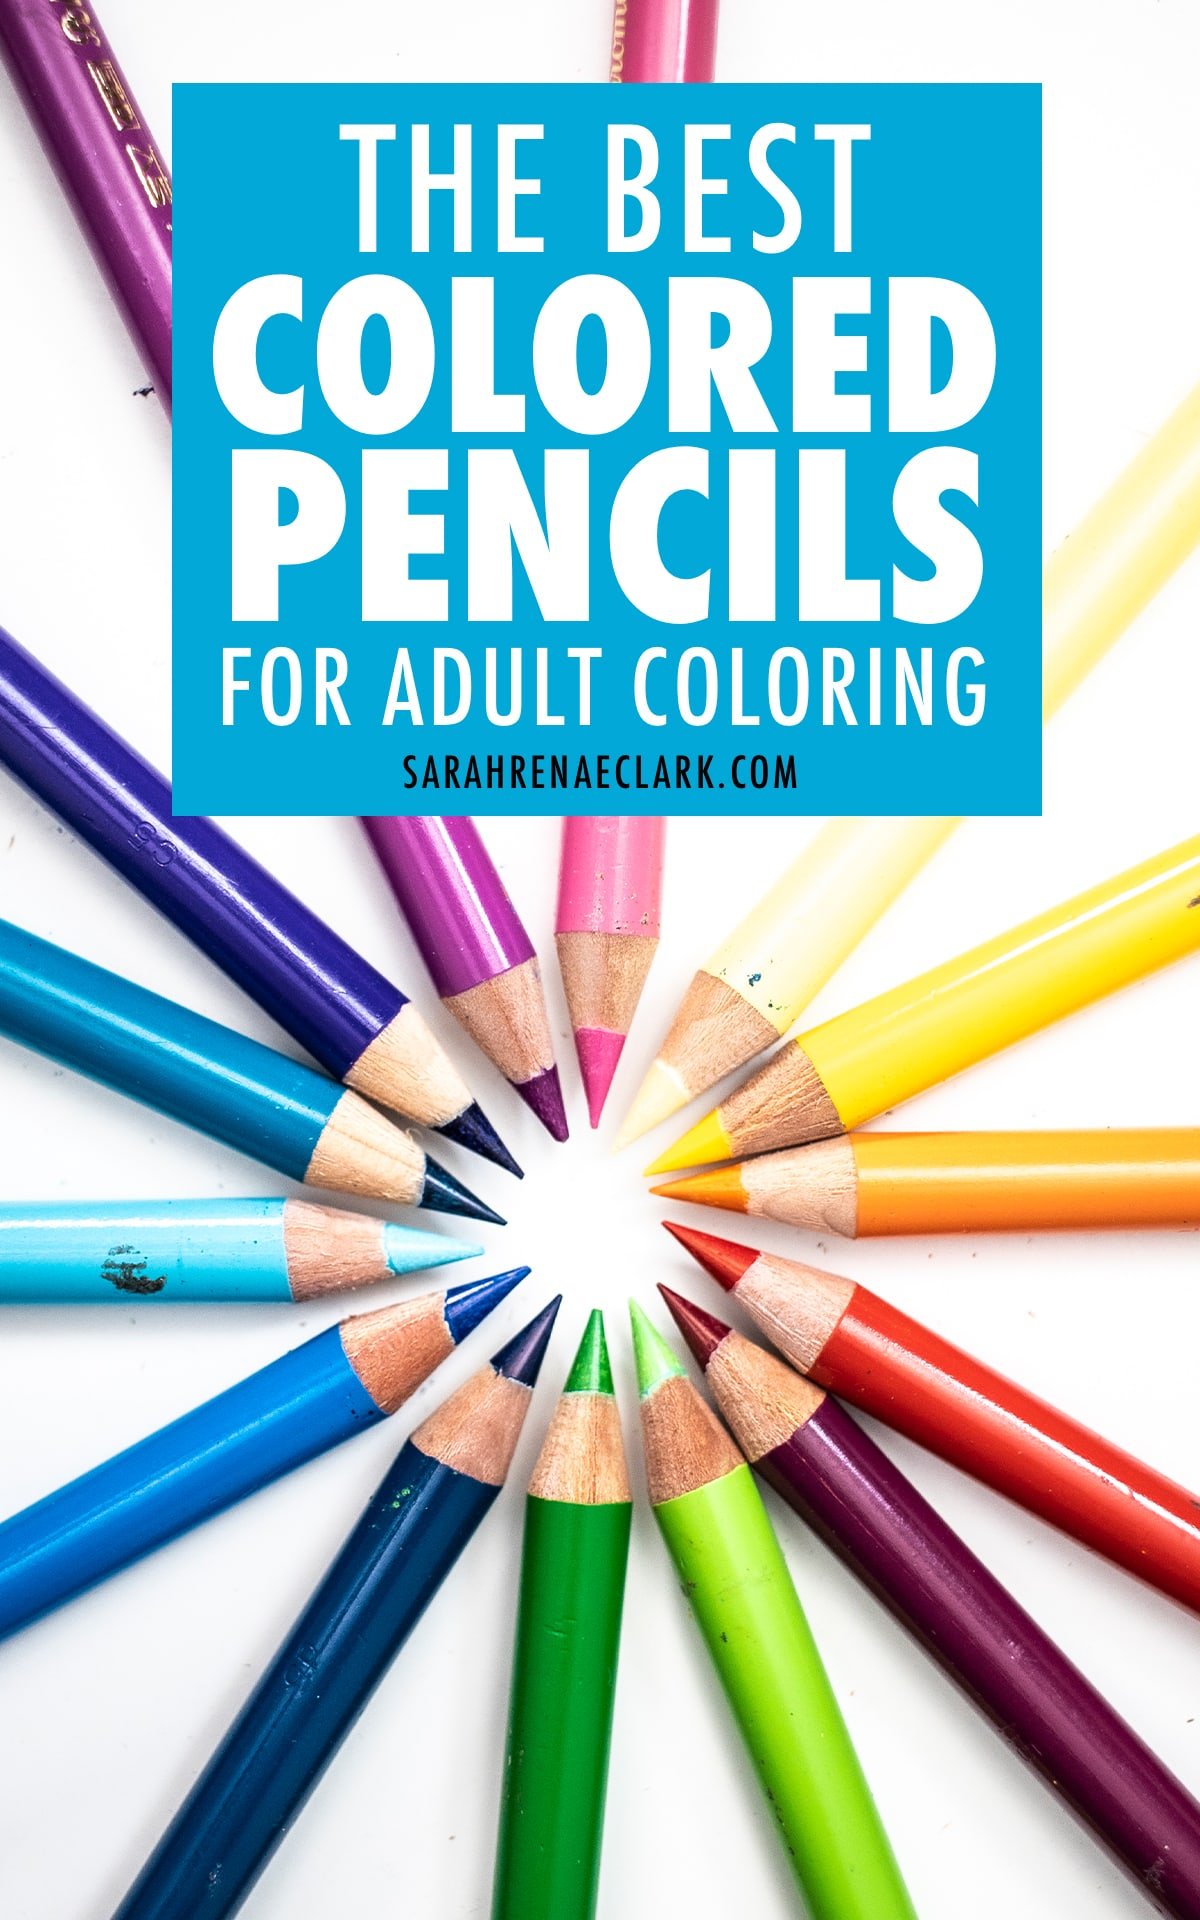 The Best Colored Pencils for Adult Coloring